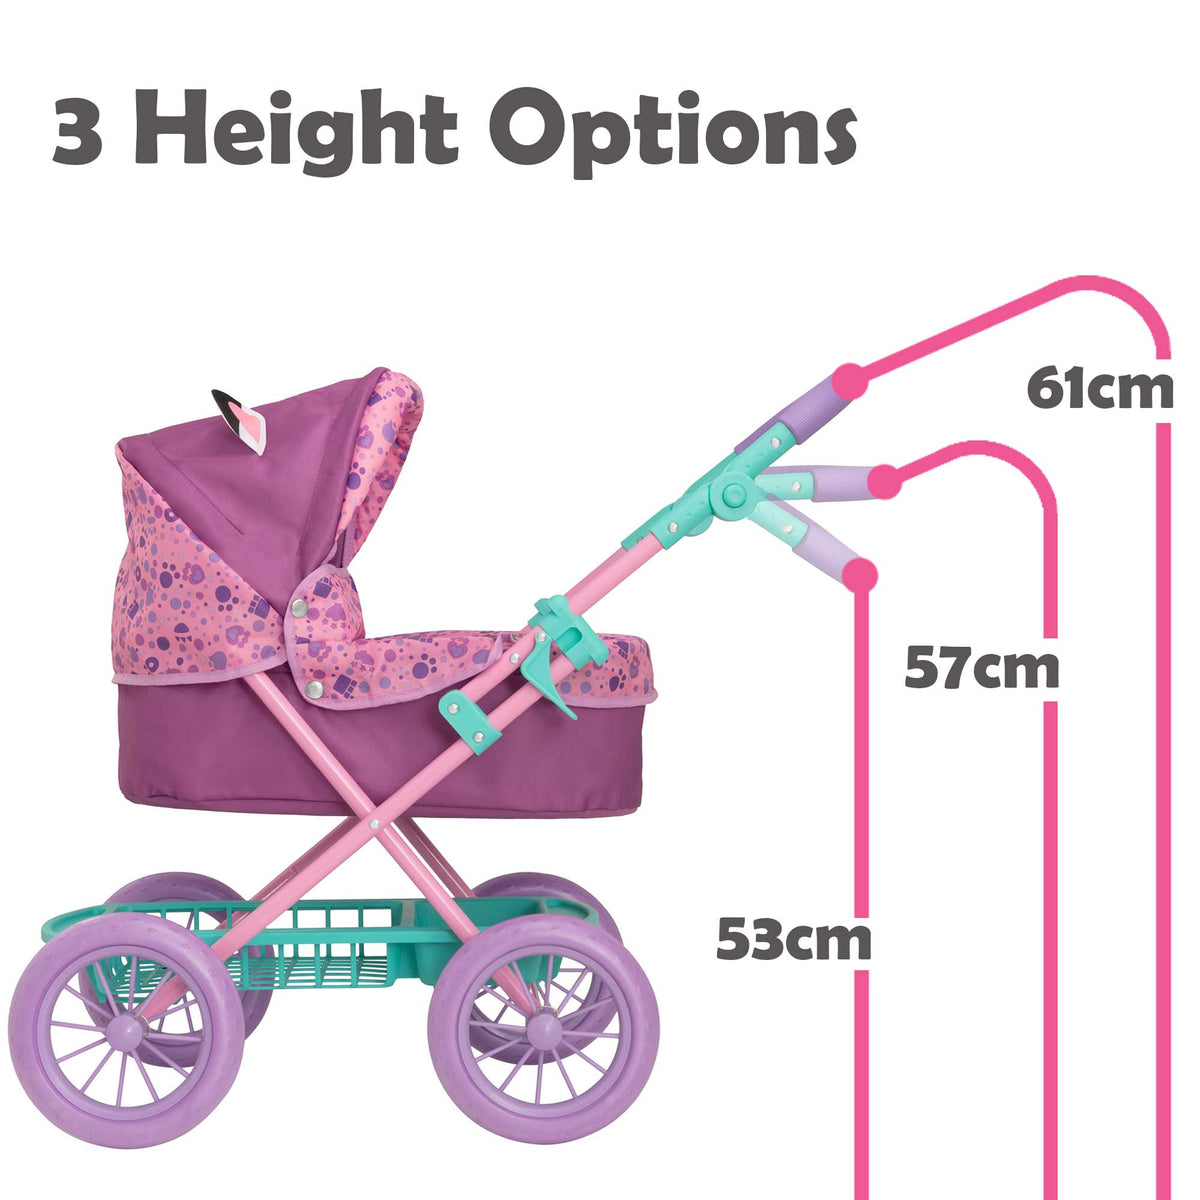 Adorable and colourful toy pram inspired by Gabby&#39;s Dollhouse, perfect for children to transport their favourite dolls and stuffed animals. Features include a sturdy frame, easy-to-push wheels, and playful designs with popular characters from the show. 